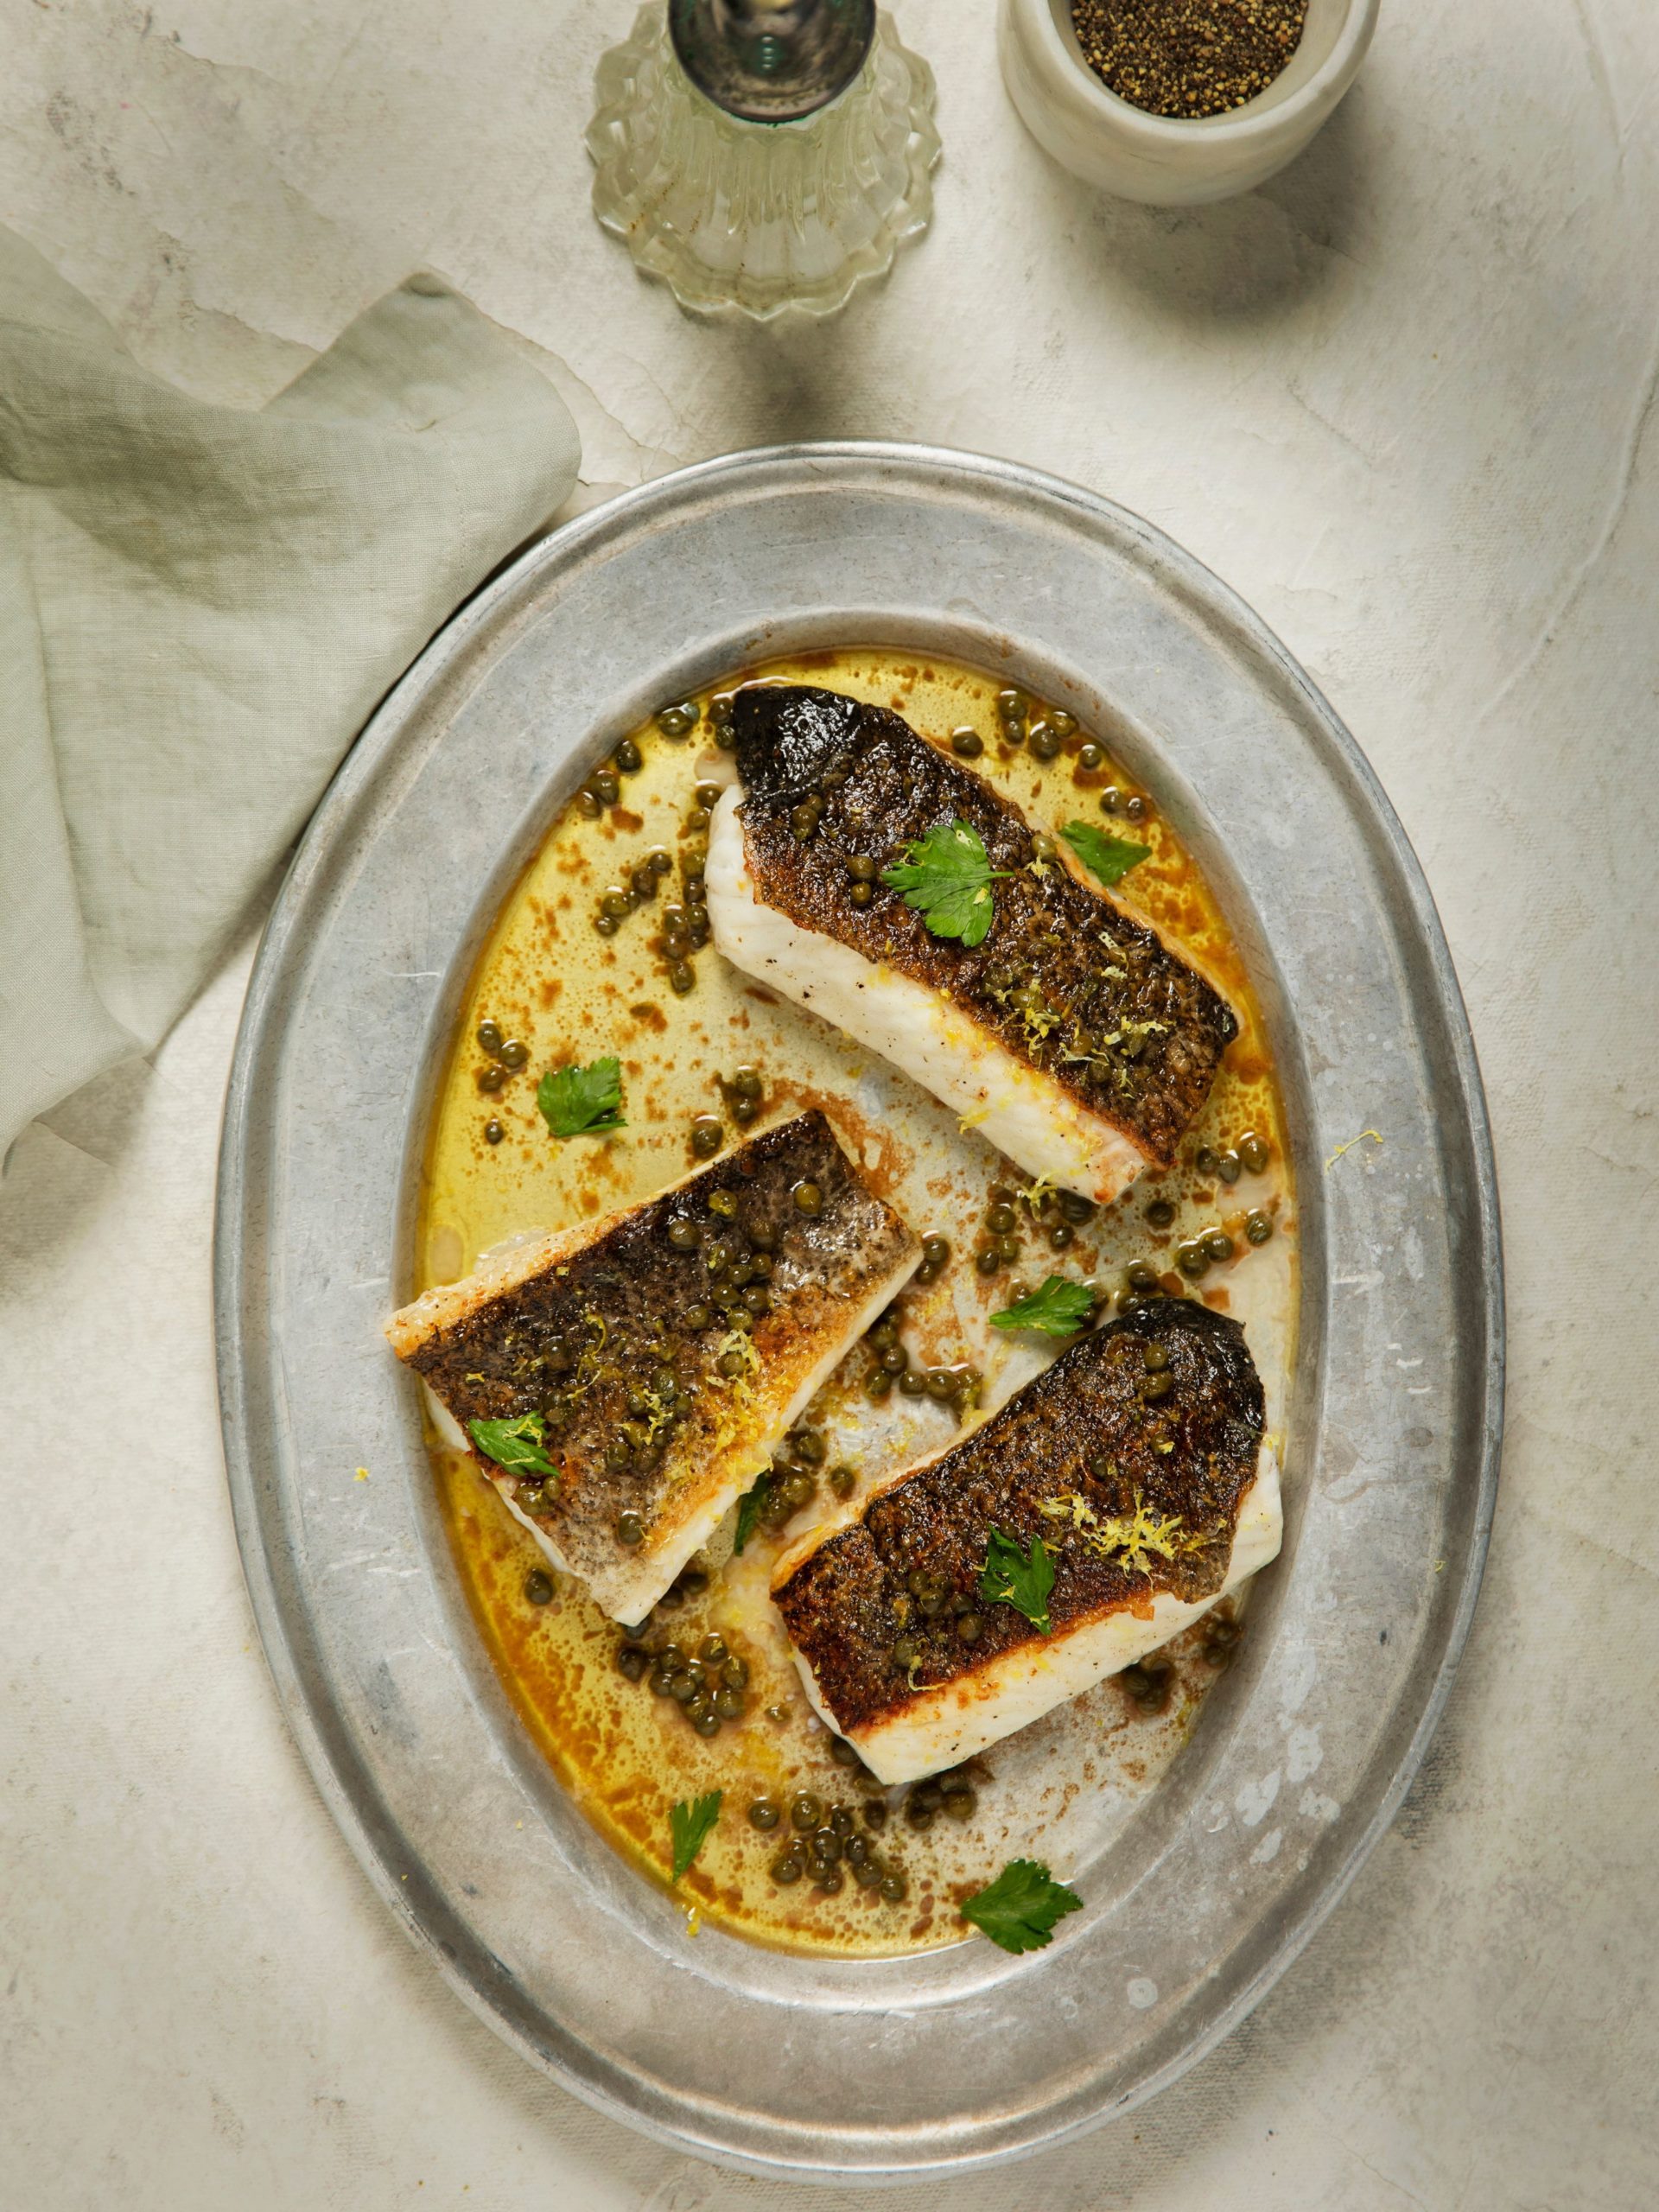 Heston Blumenthal’s Aquna Murray Cod with lemon butter and capers